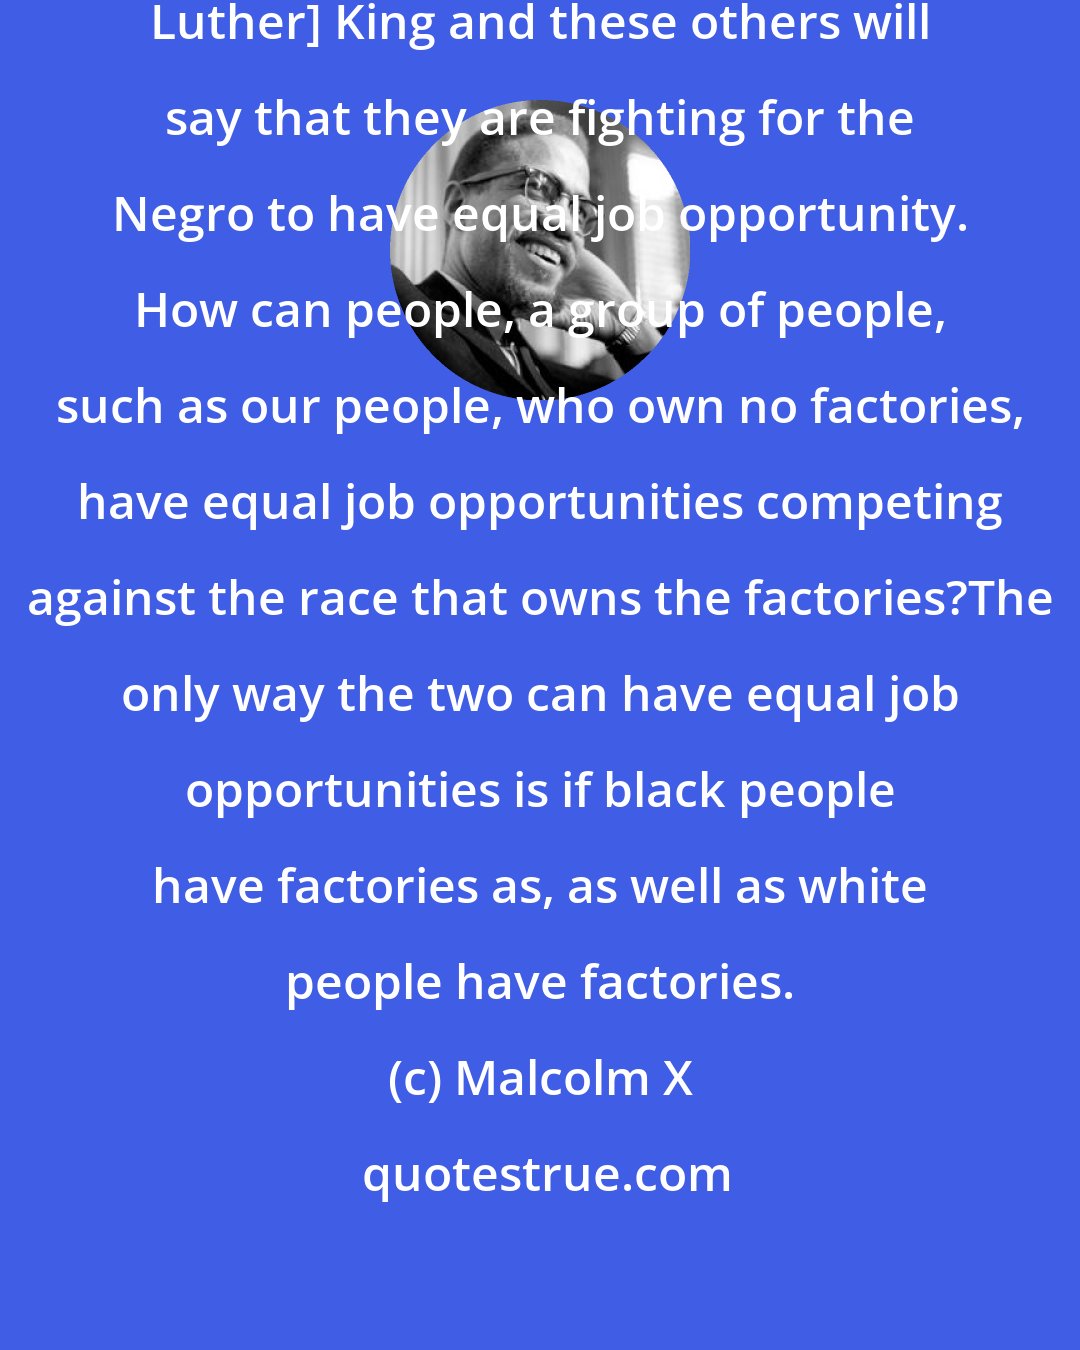 Malcolm X: If I may add, for instance, [Martin Luther] King and these others will say that they are fighting for the Negro to have equal job opportunity. How can people, a group of people, such as our people, who own no factories, have equal job opportunities competing against the race that owns the factories?The only way the two can have equal job opportunities is if black people have factories as, as well as white people have factories.